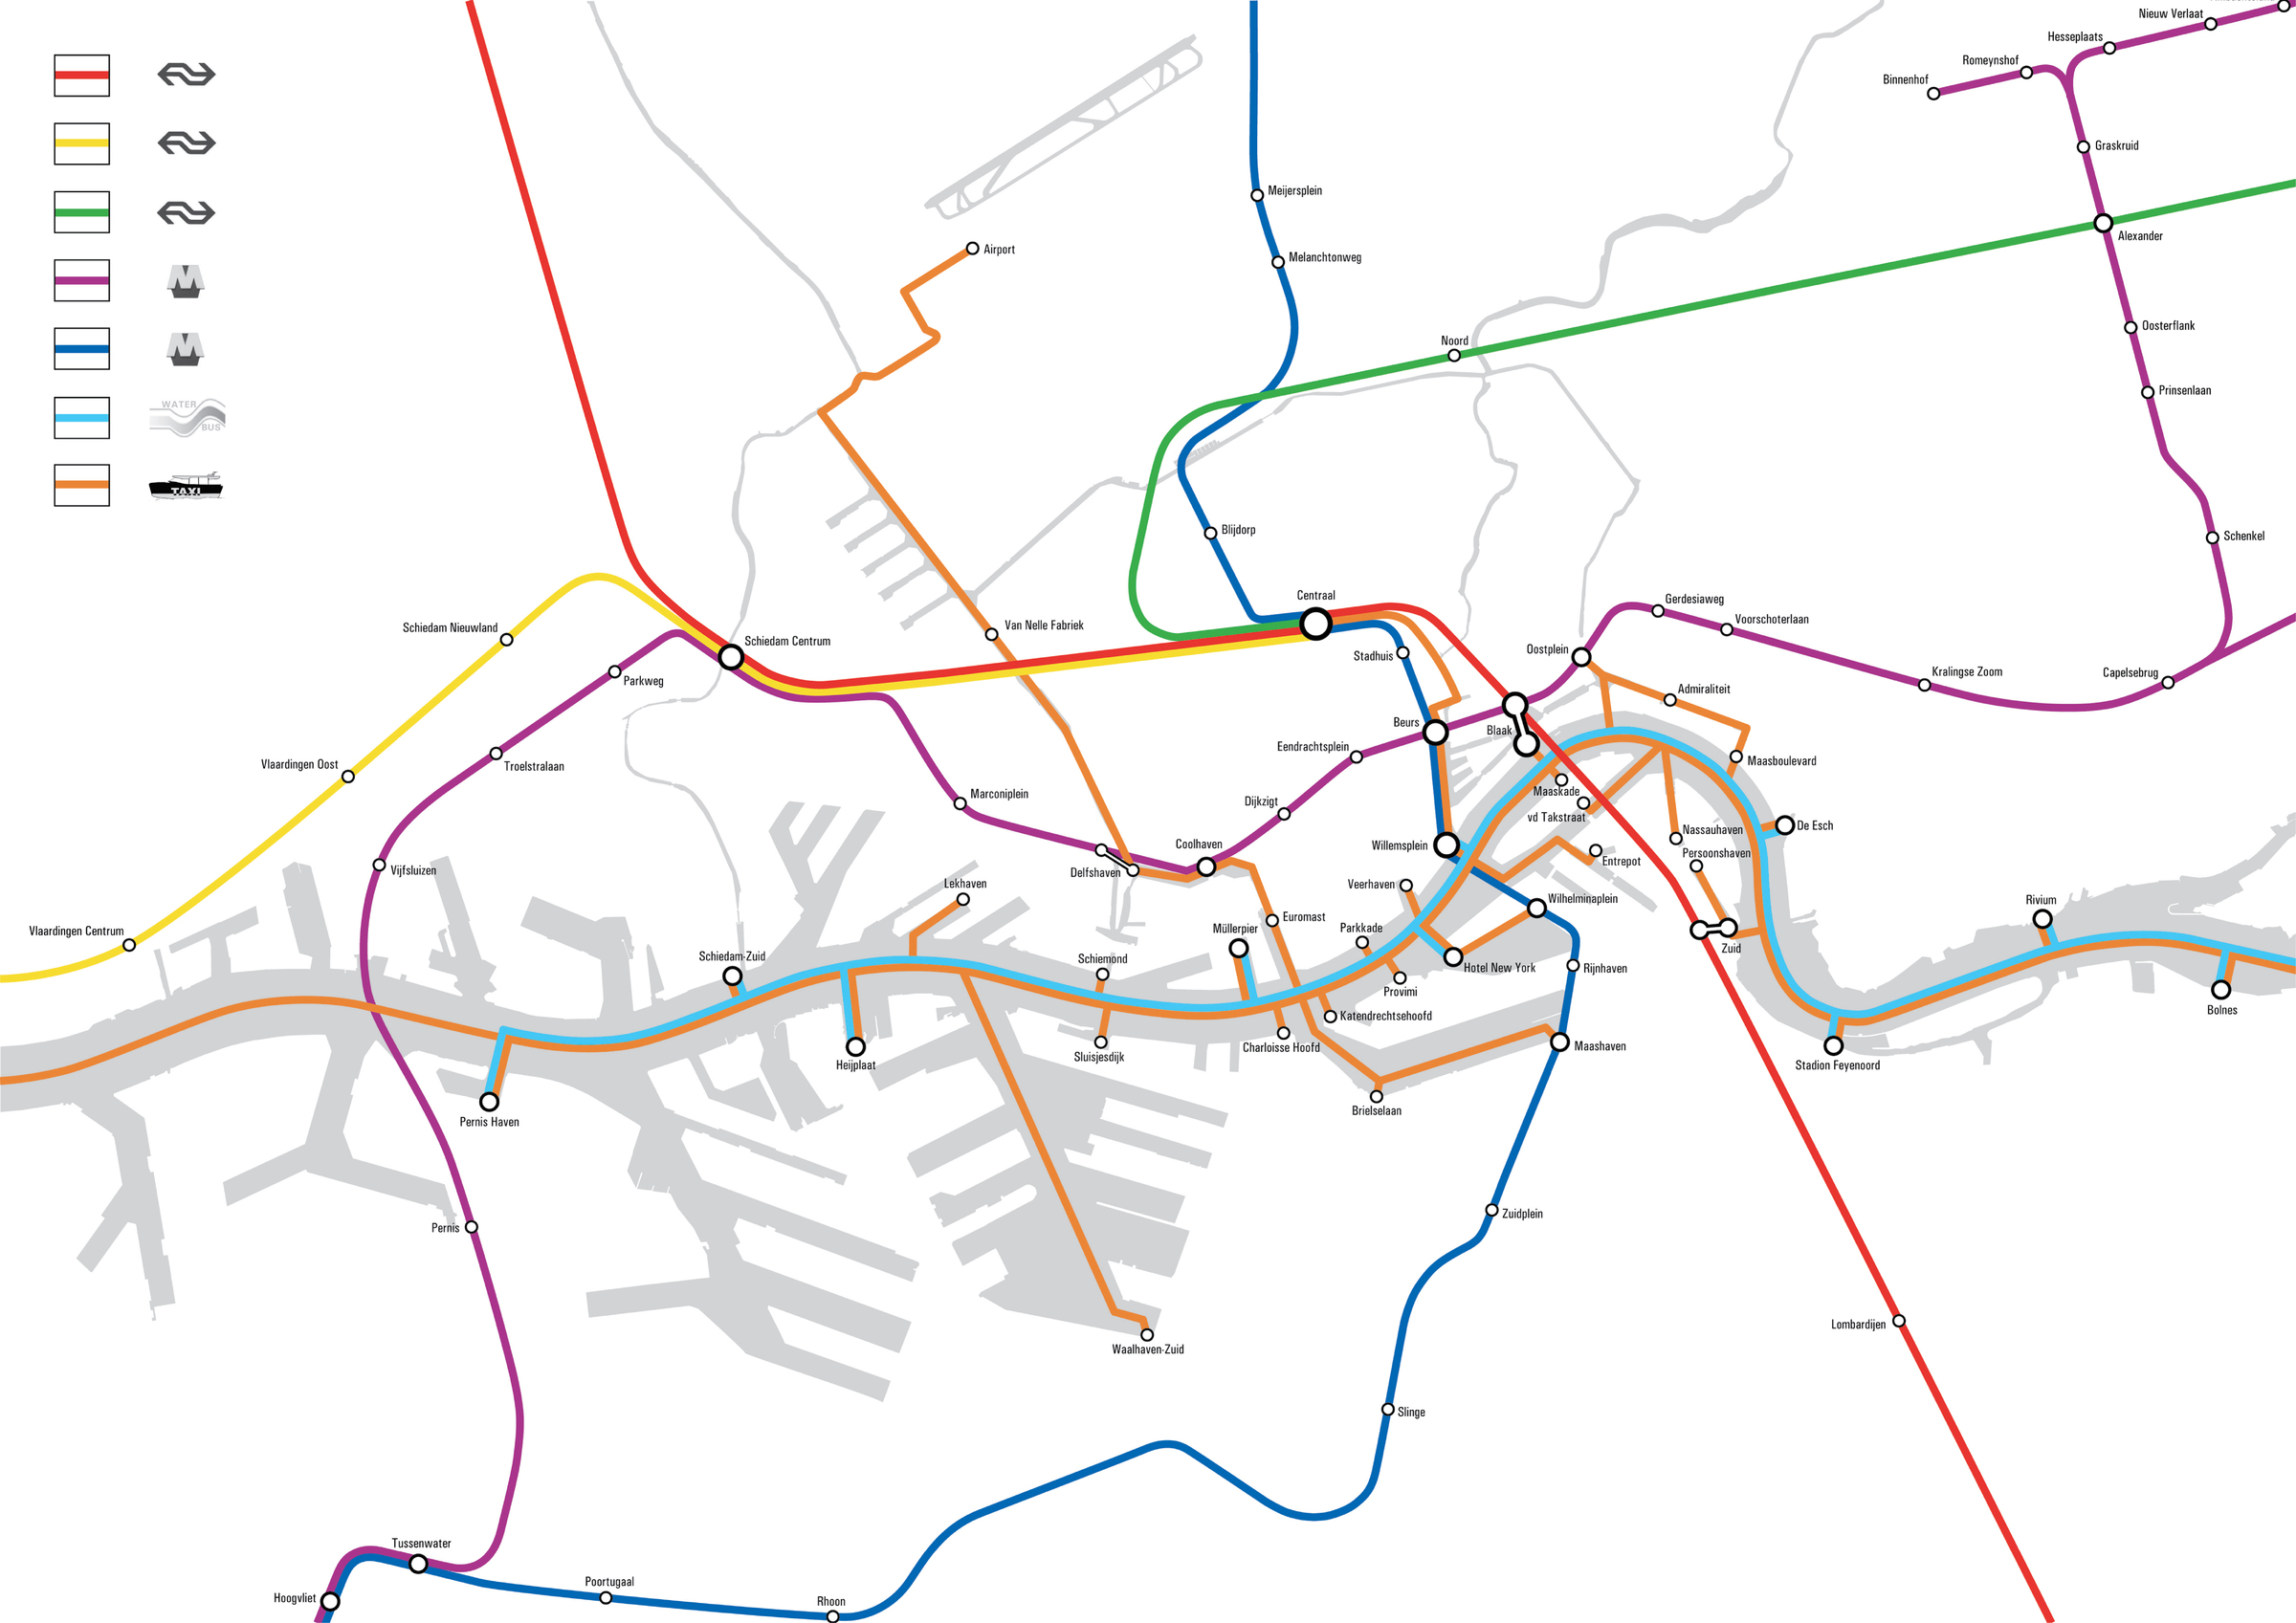 Water Network view | The complete public transport map of Rotterdam (land and water)